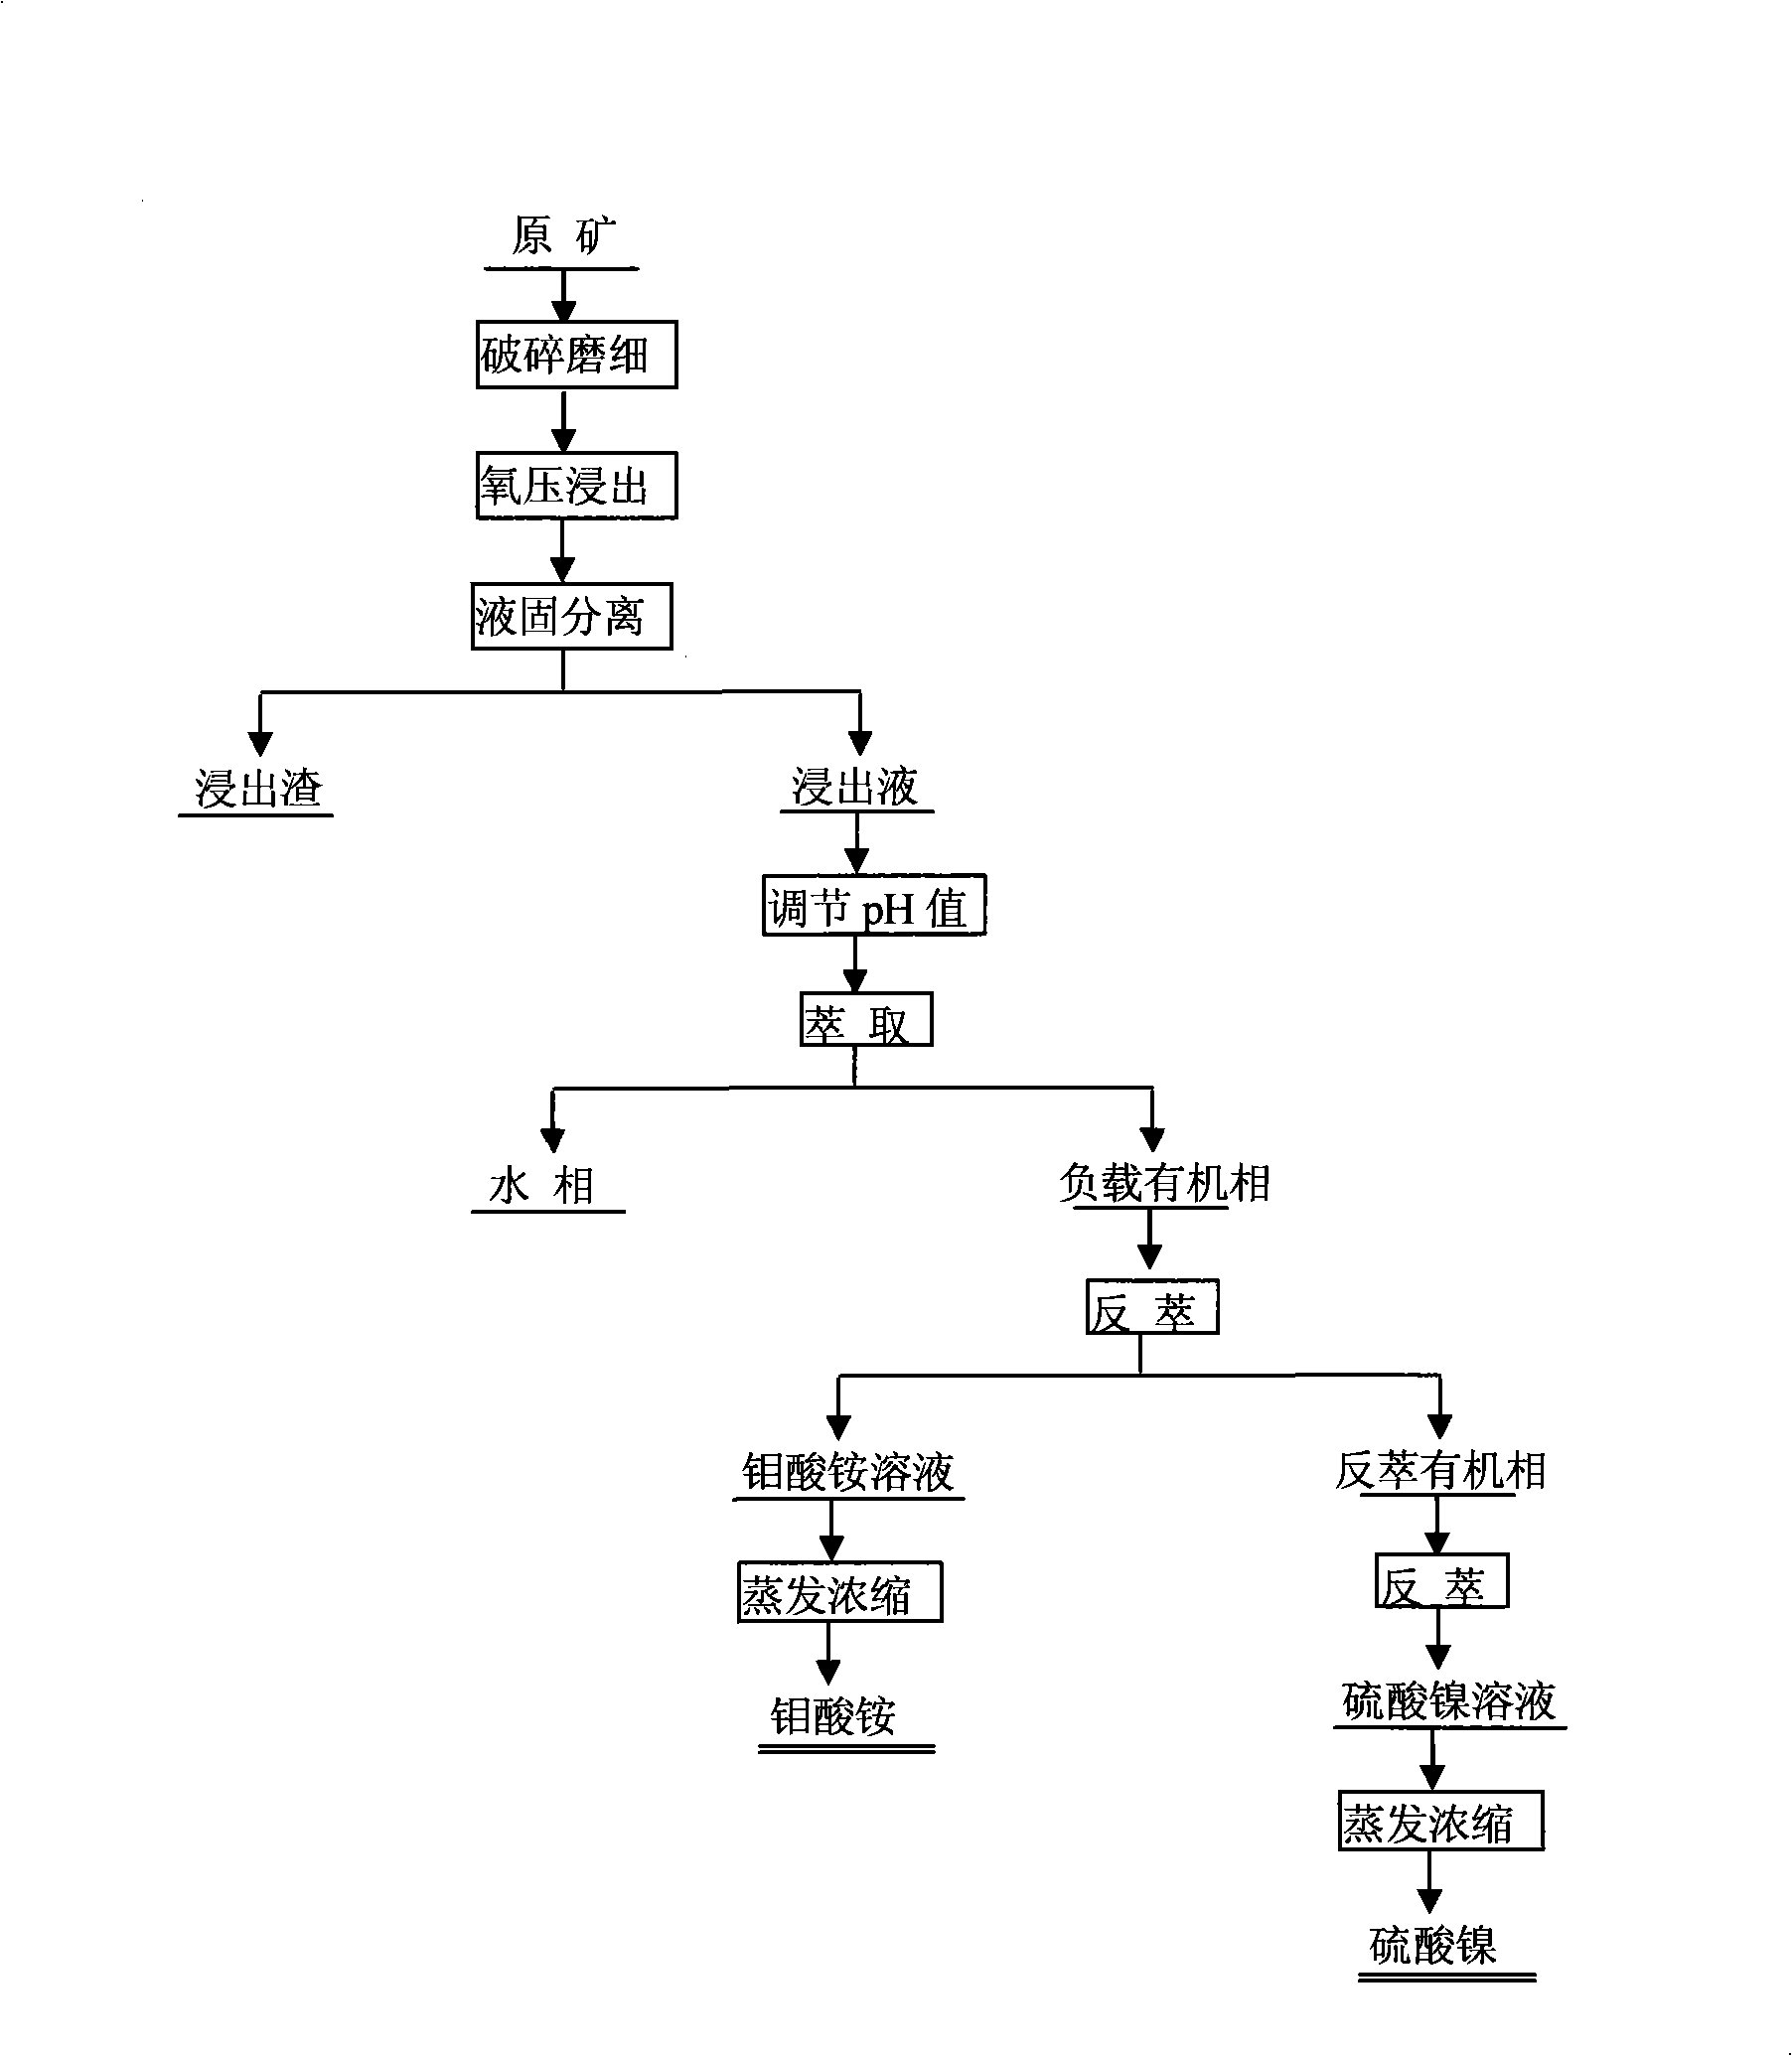 Process for separating molybdenum and nickel form black shale containing molybdenum and nickel